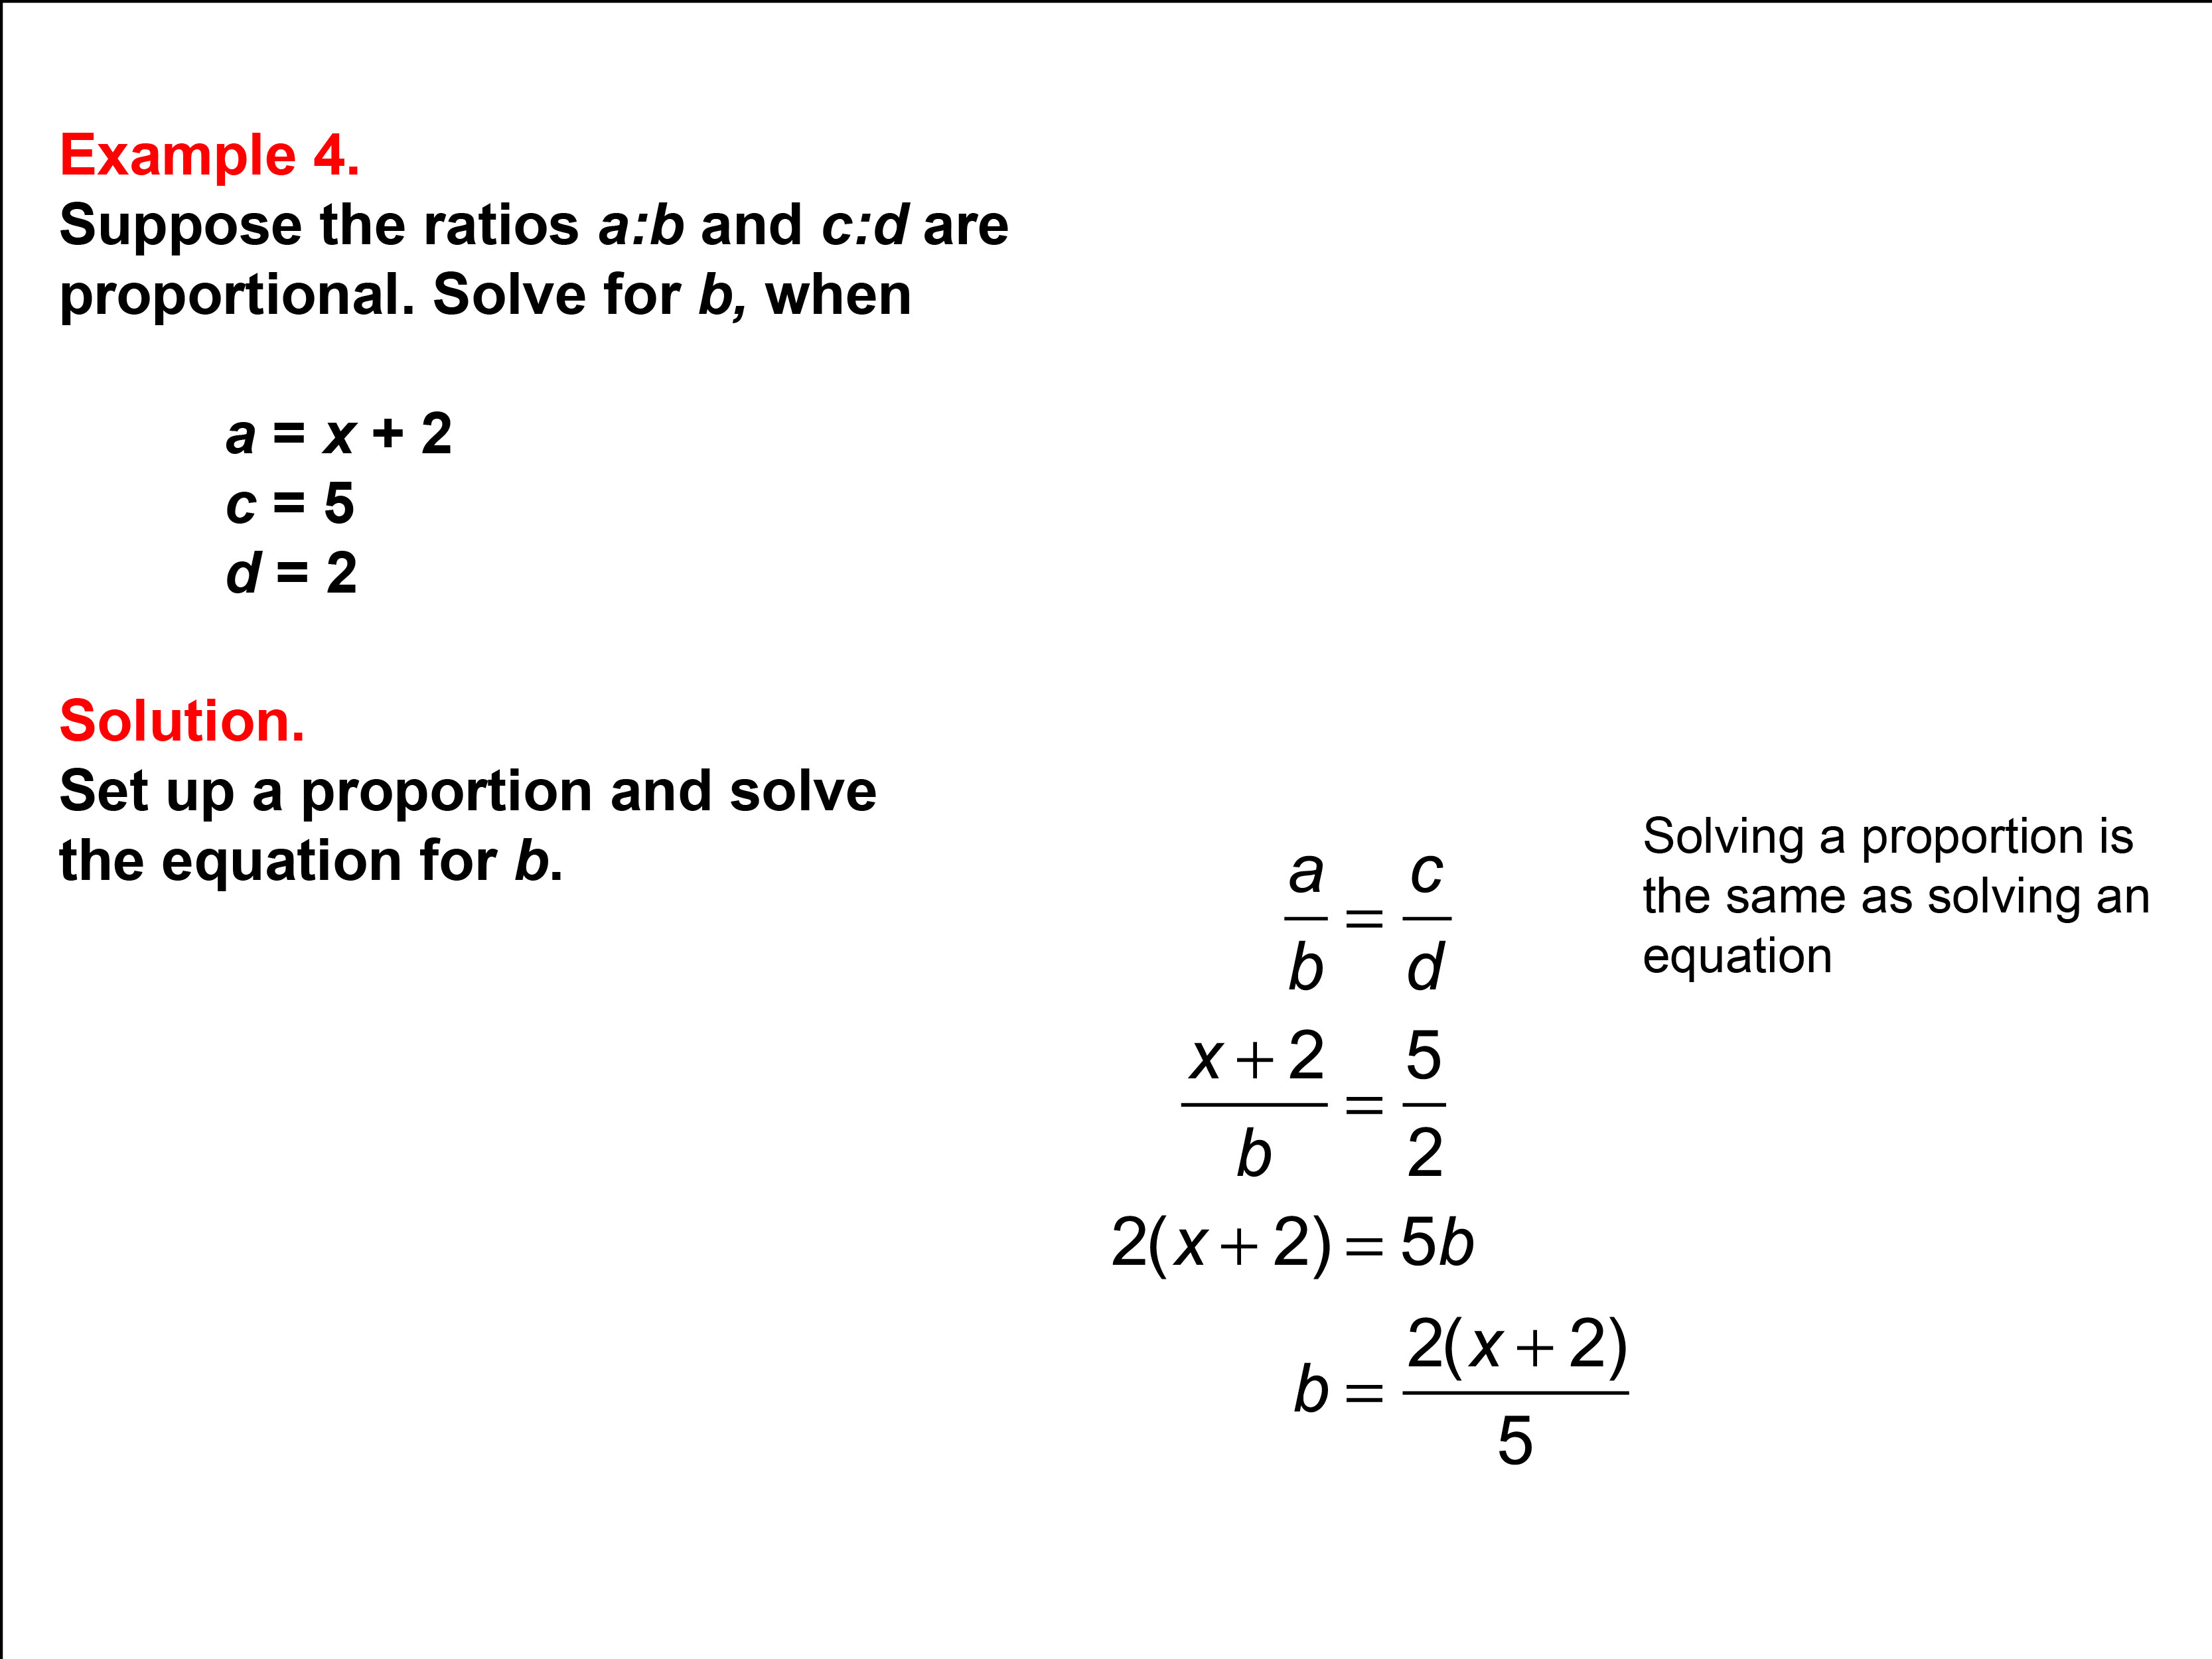 Solving Proportions: Example 4. Solving a proportion of the form A over B equals C over D for b. Other variables expressed as variables and numbers.